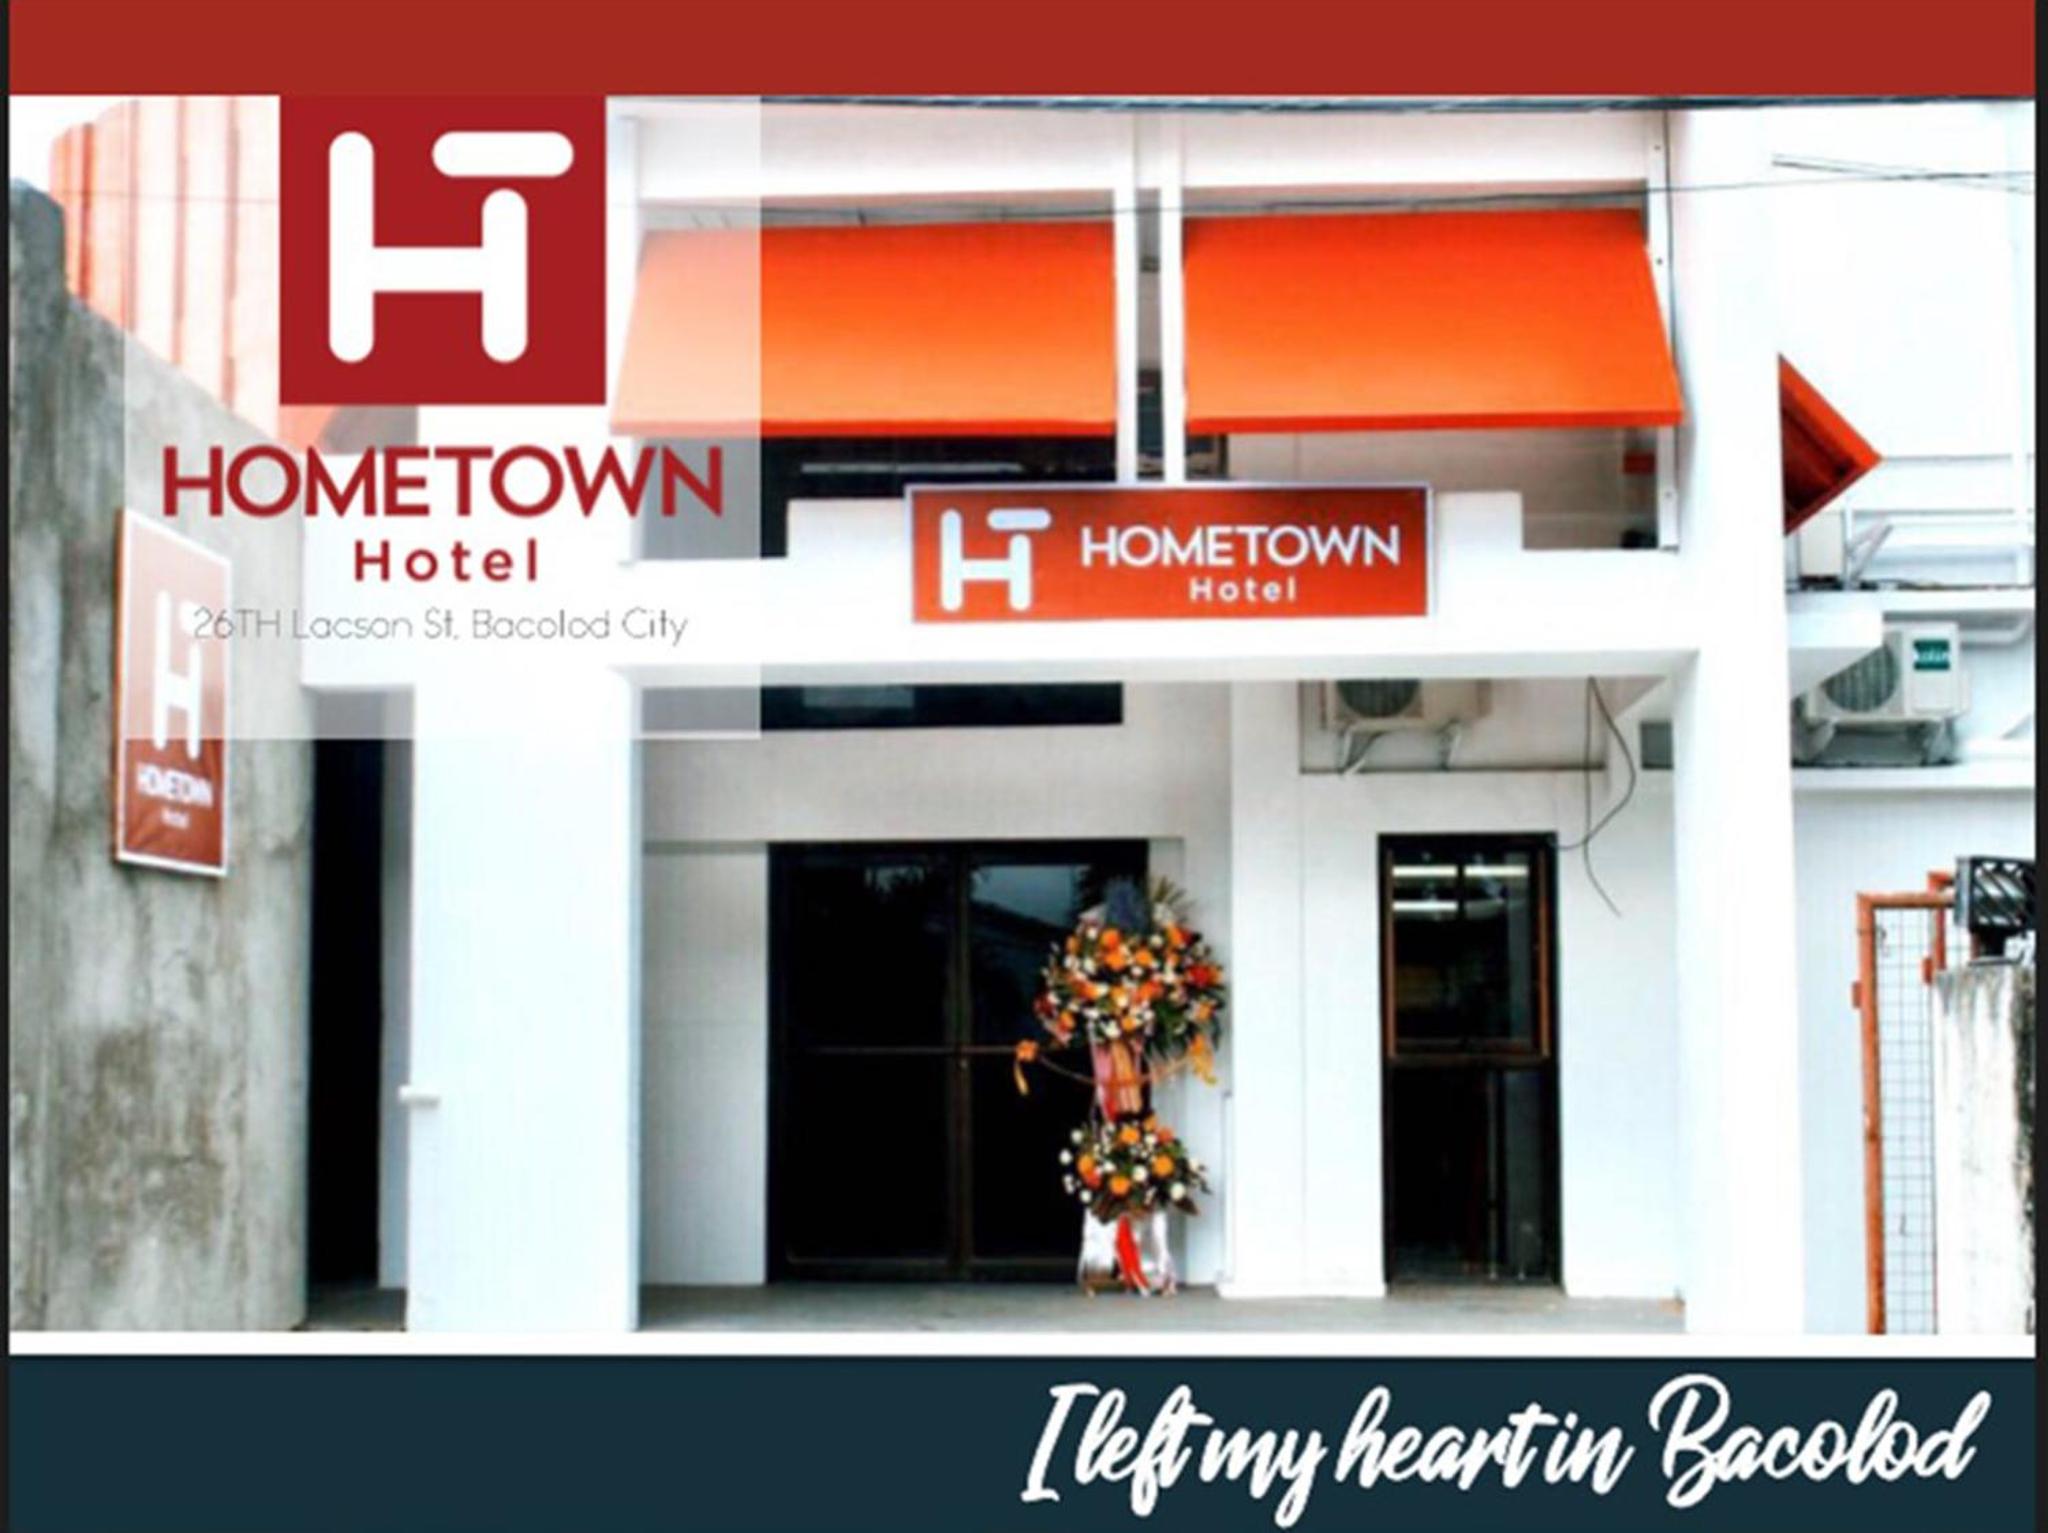 Hometown Hotel Bacolod Lacson